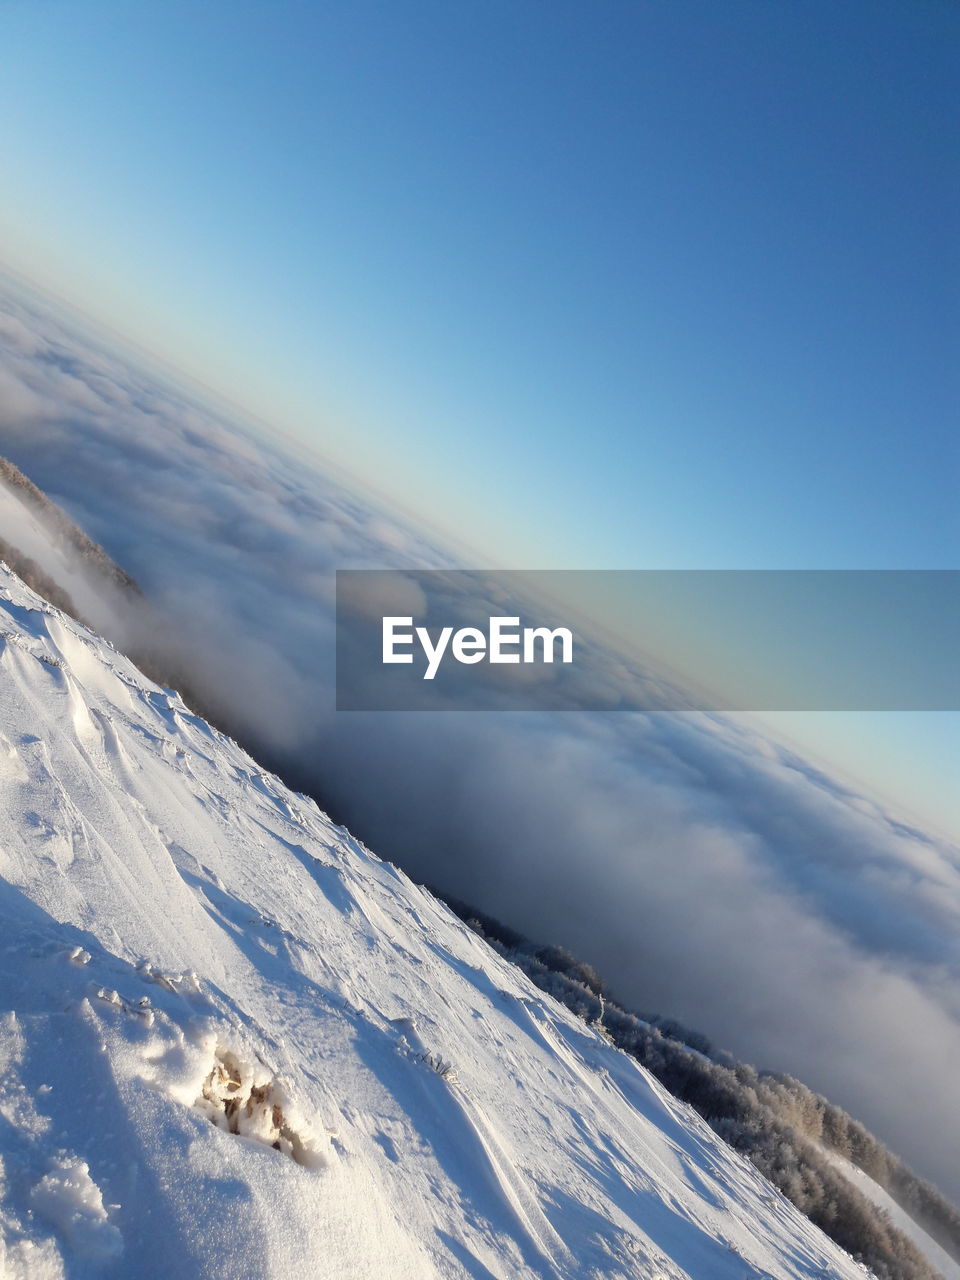 LOW ANGLE VIEW OF SNOW COVERED MOUNTAIN AGAINST SKY